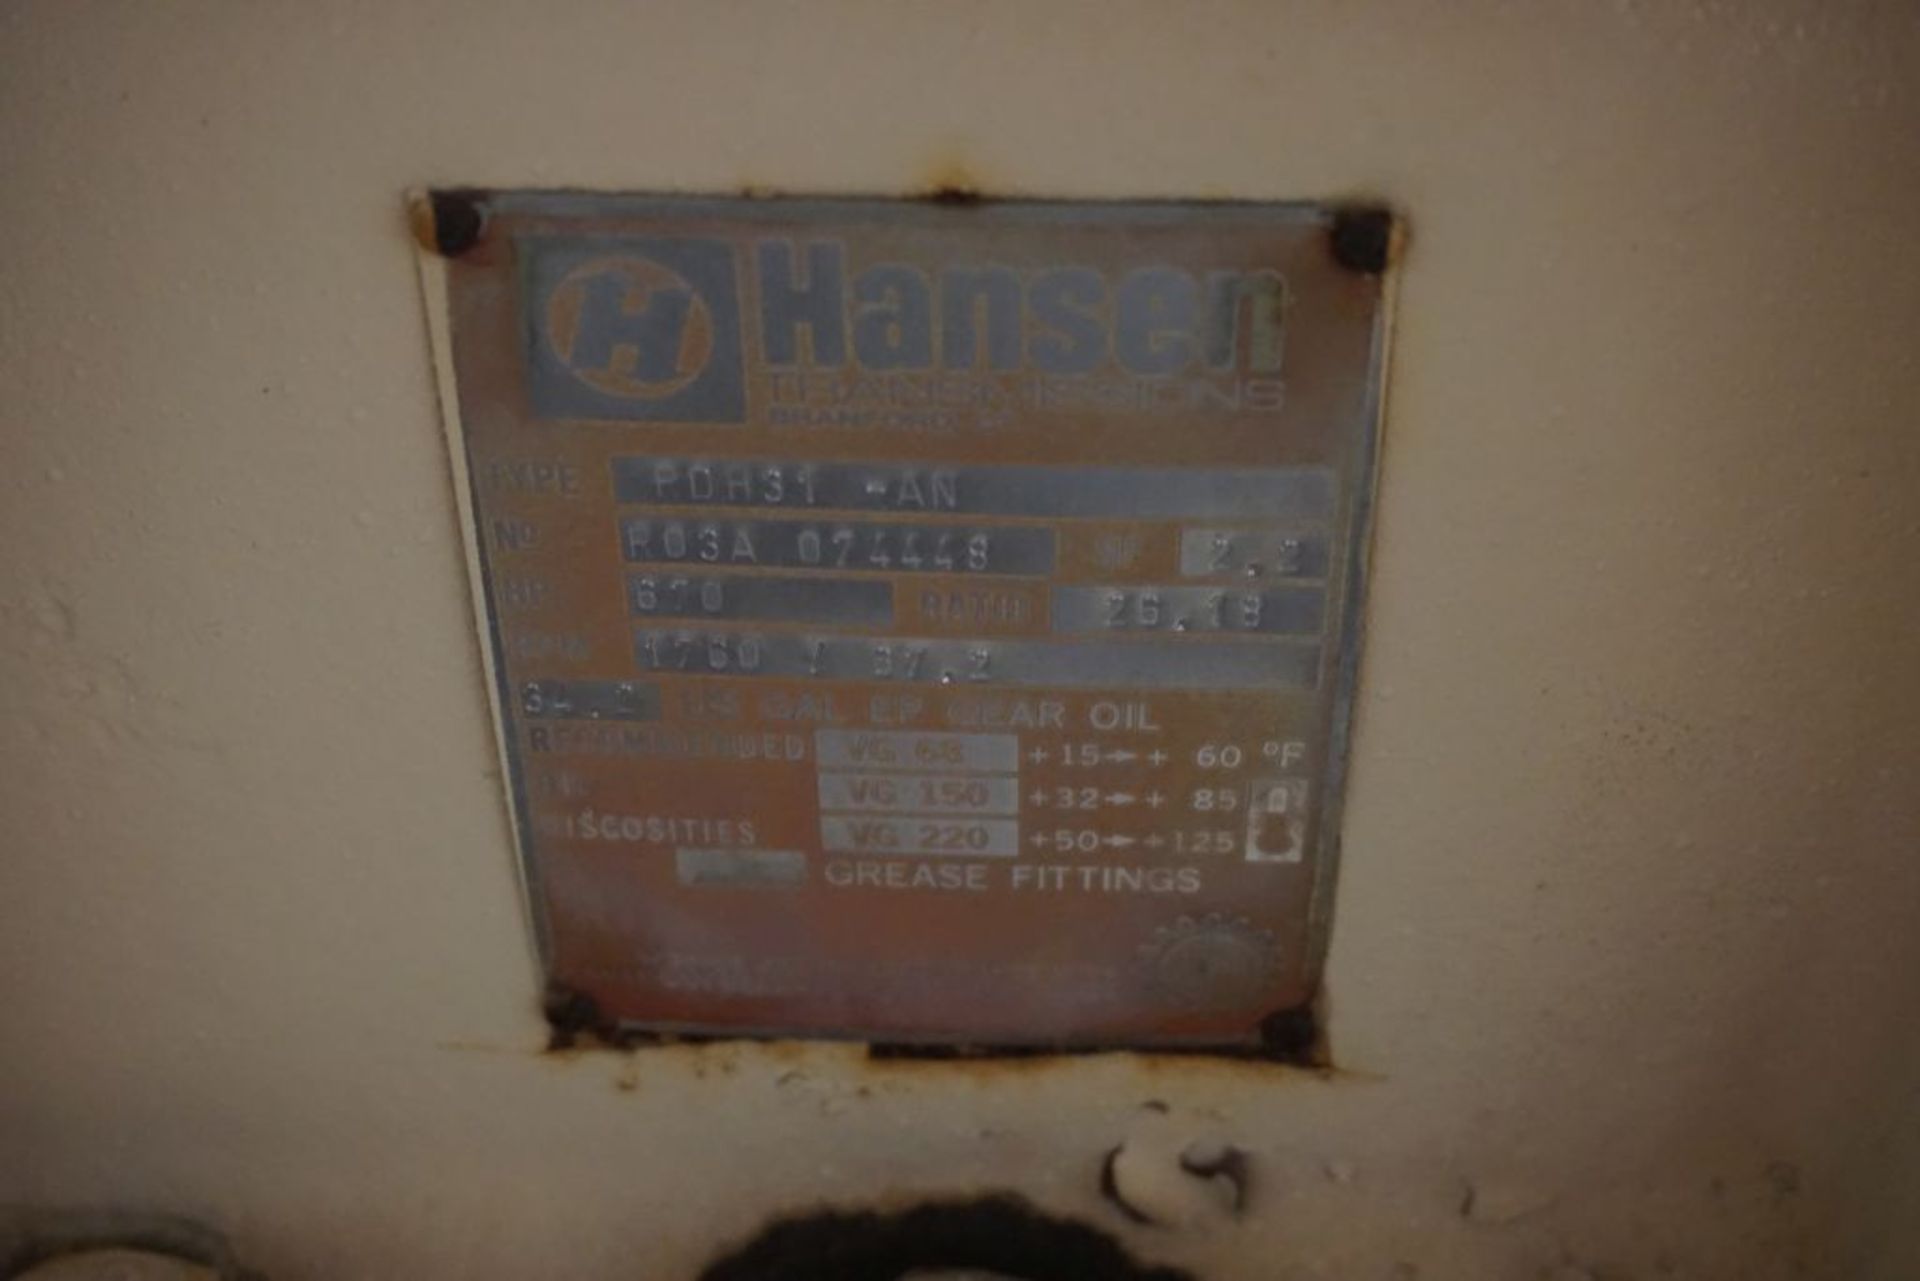 Hansen Gearbox|Type: RDH31-AN; SF: 2.2; 670 HP; Ratio: 26.18; RPM: 1780/67.2|Lot Loading Fee: $5.00 - Image 8 of 8